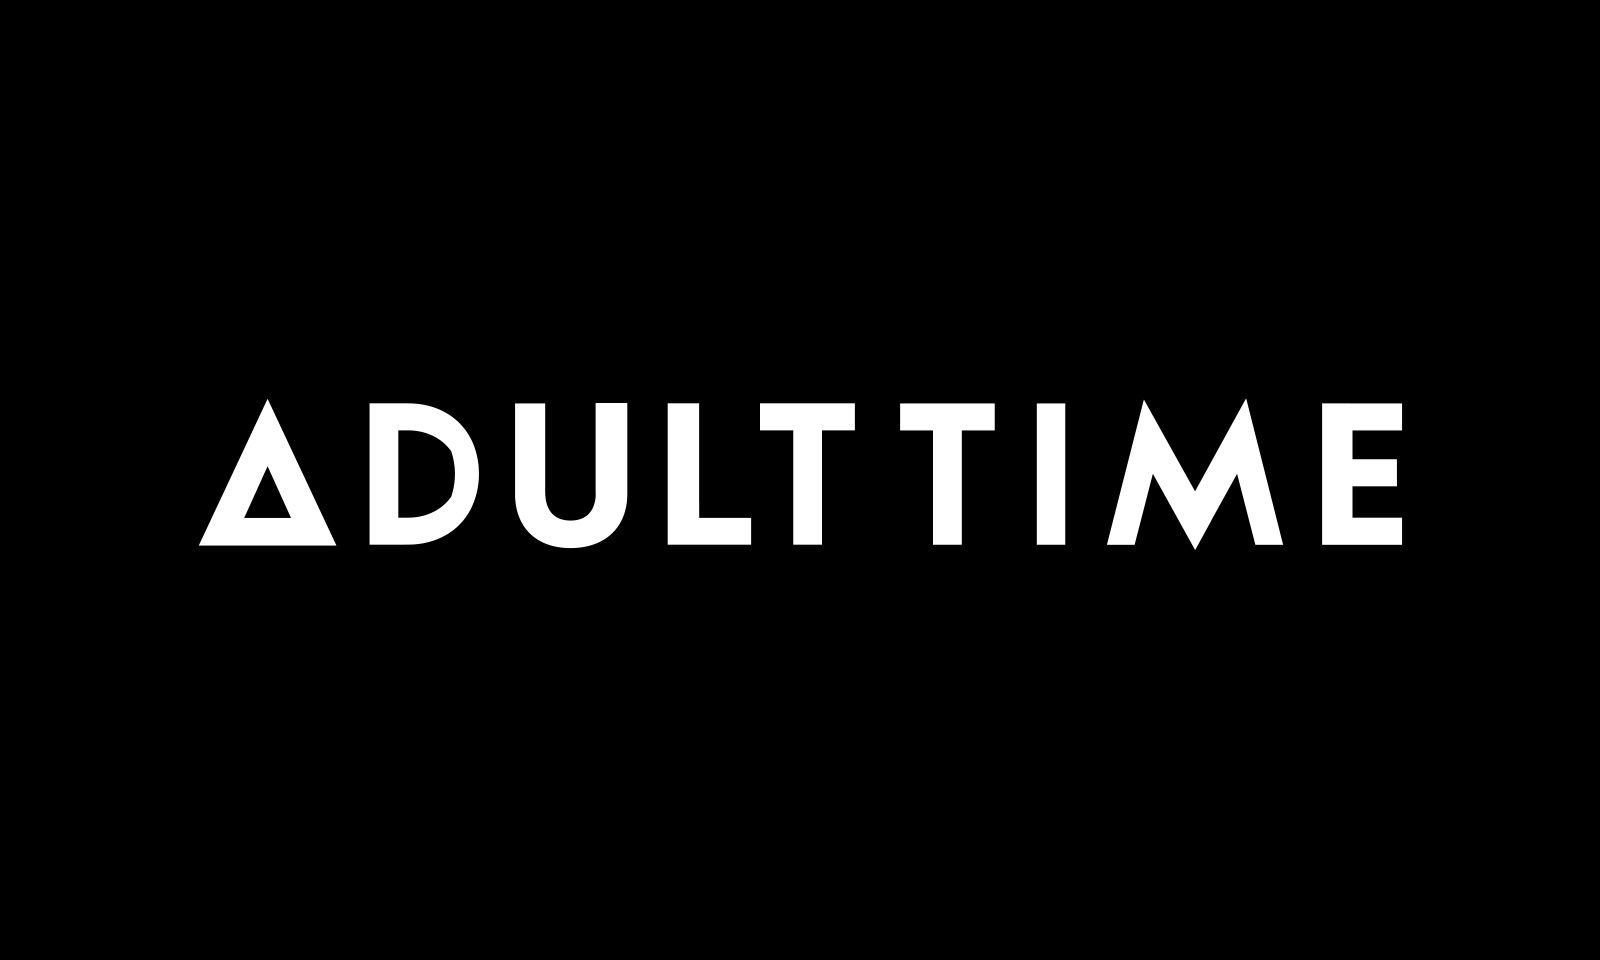 Adult Time 'Pay for Your Porn' Campaign to Feature Star IG Lineup